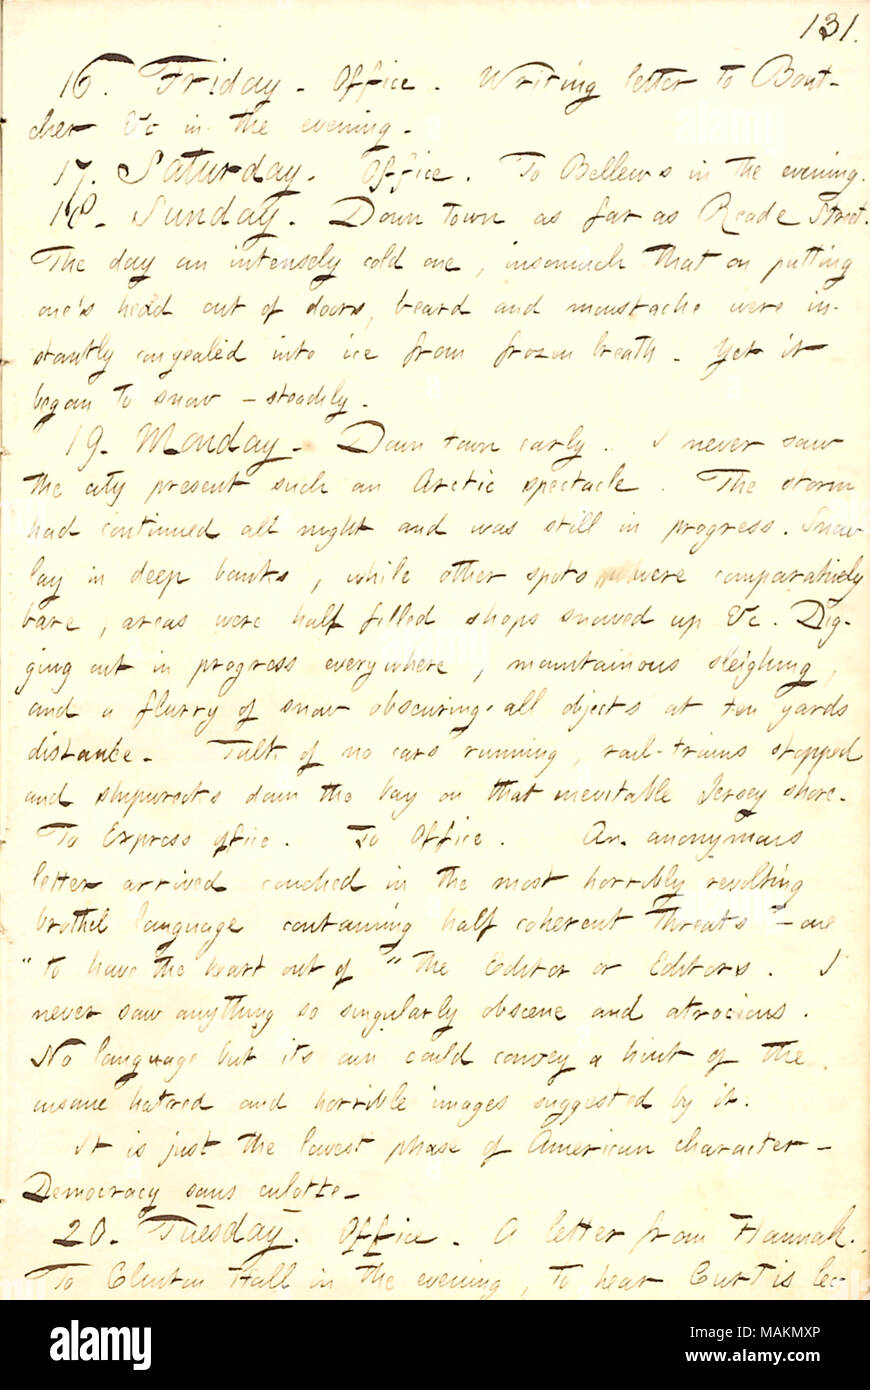 Describes the winter scene in New York and receiving an angry letter at the European.  Transcription: 16. Friday. [European] Office. Writing letter to [William] Boutcher &c in the evening. 17. Saturday. Office. To [Frank] Bellew ?s in the evening. 18. Sunday. Down town as far as Reade Street. The day an intensely cold one, insomuch that on putting one ?s head out of doors, beard and moustache were instantly congealed into ice from frozen breath. Yet it began to snow  ? steadily. 19. Monday. Down town early. I never saw the city present such an Arctic spectacle. The storm had continued all nigh Stock Photo